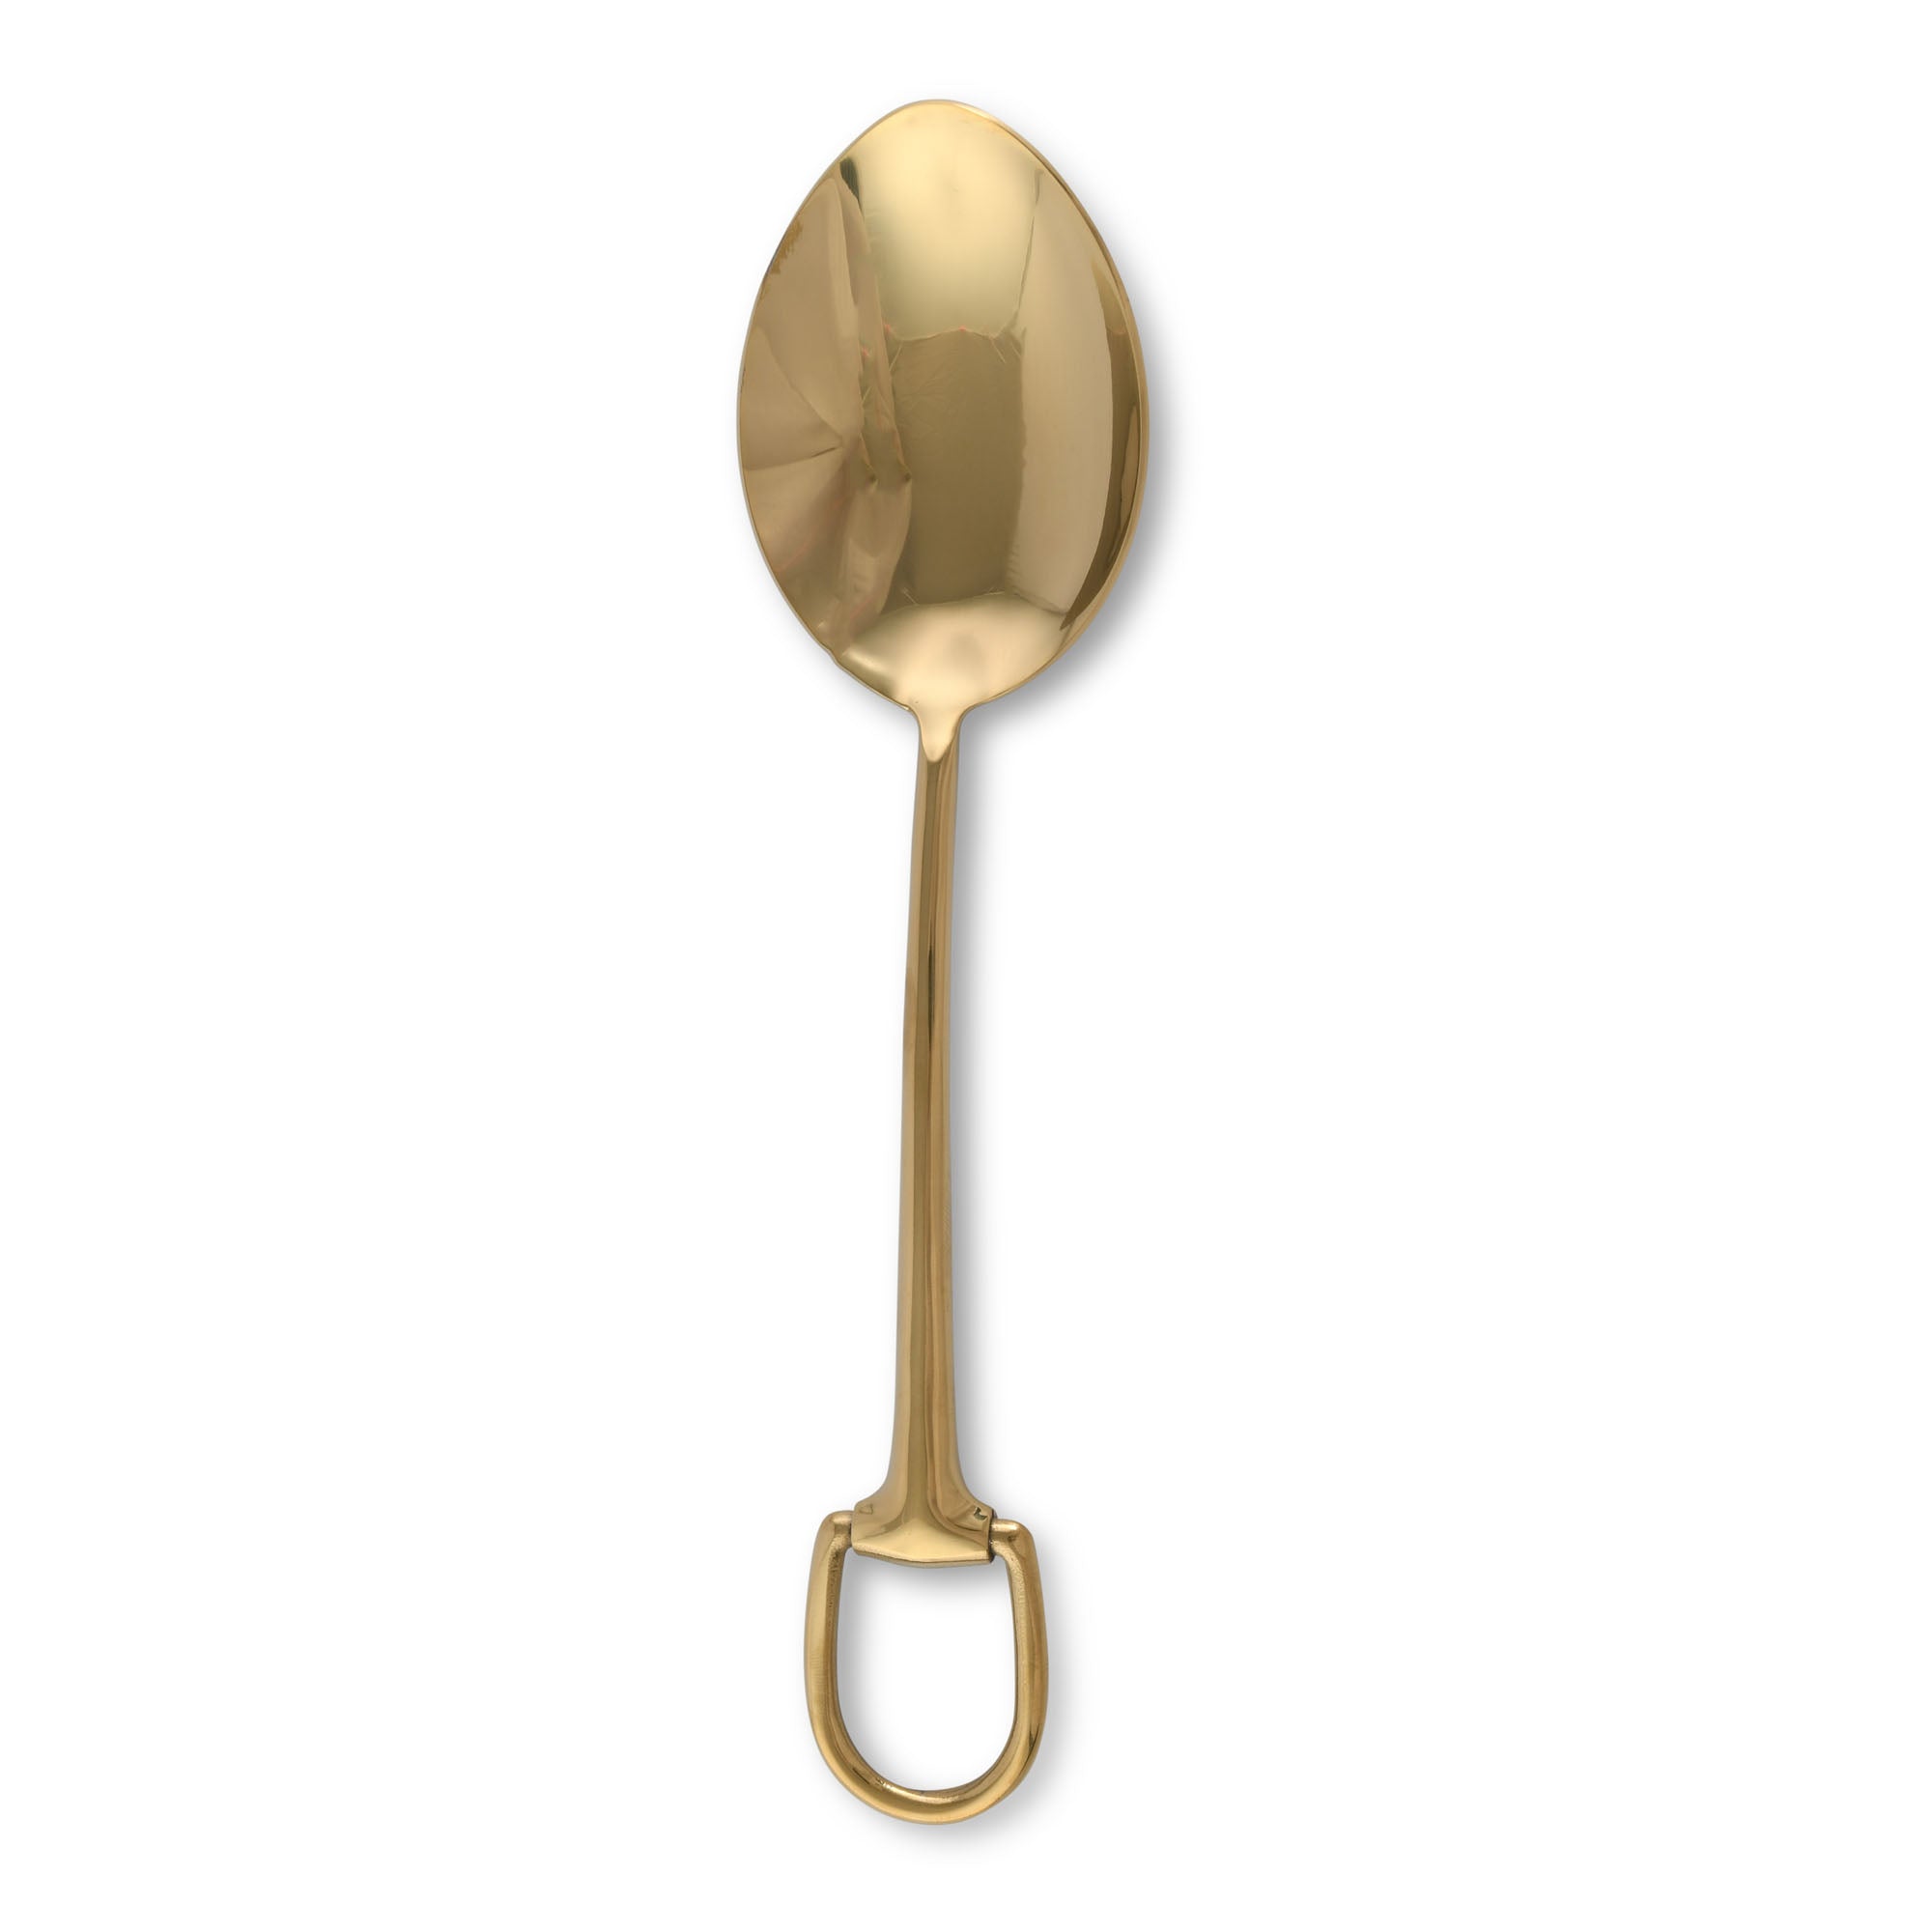 Vagabond House Stirrup Serving Spoon - Stainless Steel Shiny Gold Product Image